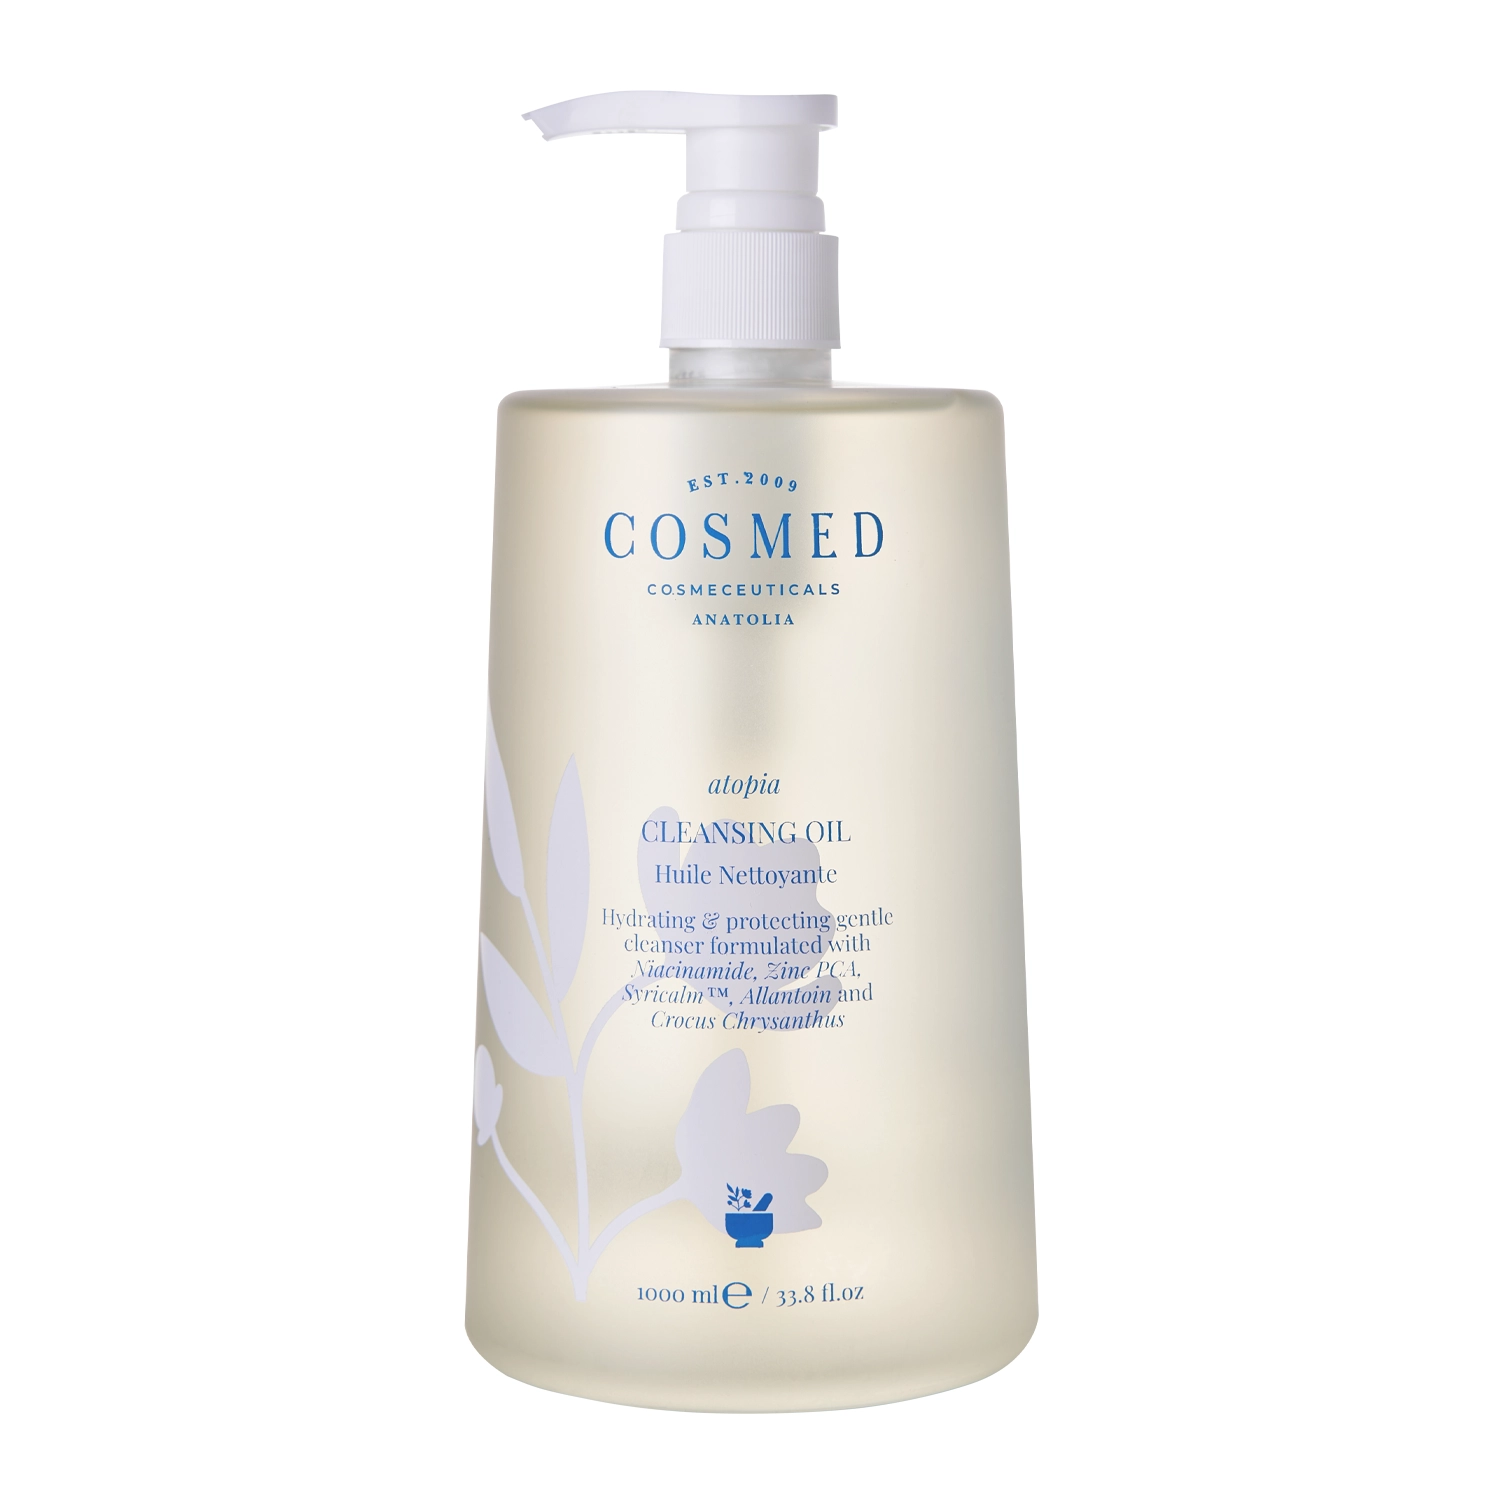 Cosmed - Atopia Cleansing Oil - Масло для умывания лица и тела - 1L